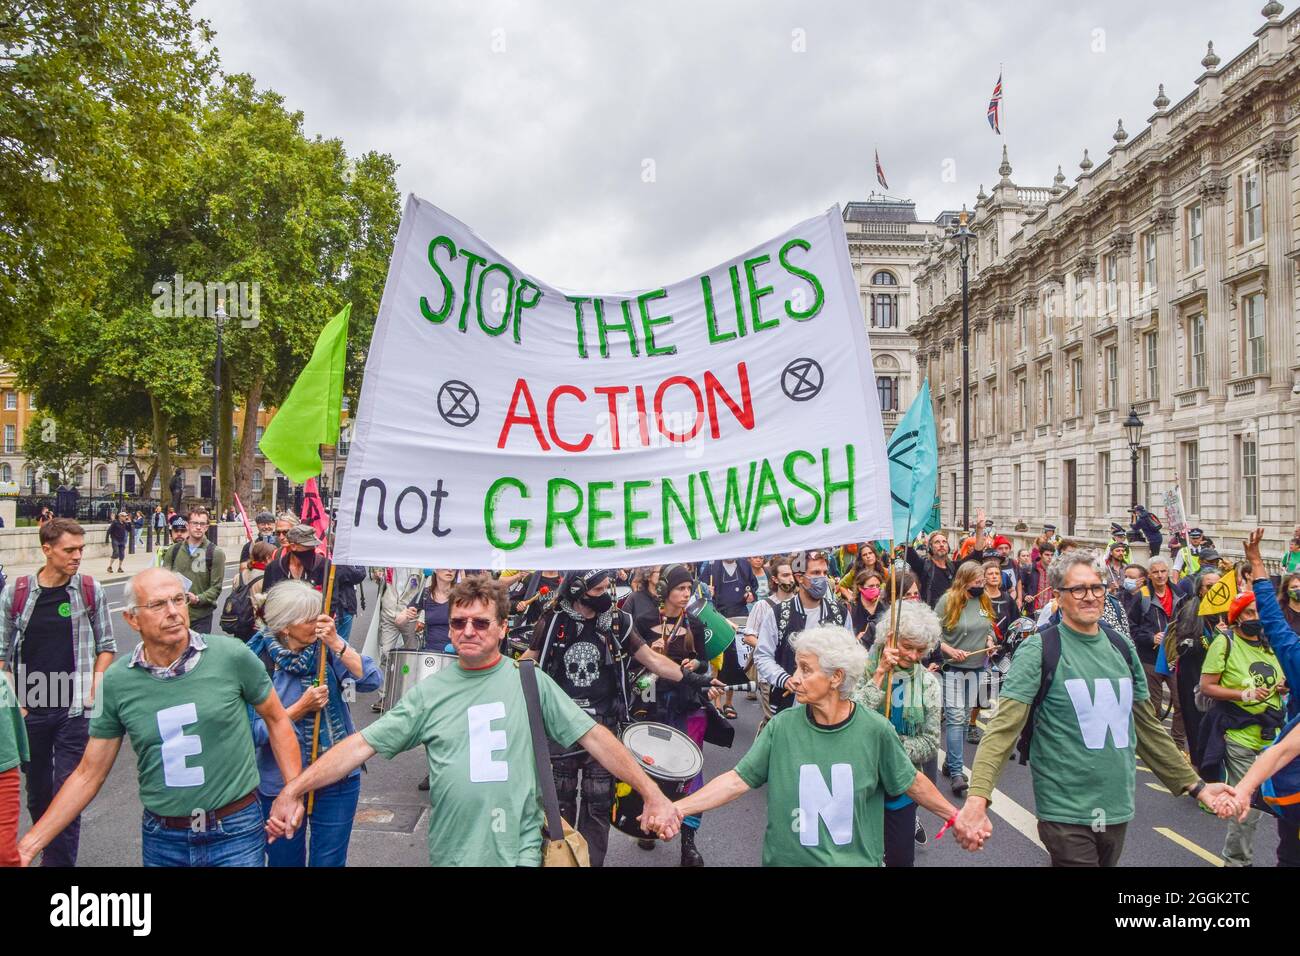 London, UK. 01st Sep, 2021. Protesters carry a banner which says 'Stop The Lies - Action Not Greenwash' while marching during the demonstration outside Downing Street.Extinction Rebellion protesters staged a 'greenwash' protest in Westminster, part of their two-week Impossible Rebellion campaign calling on the UK Government to act meaningfully on the climate and ecological crisis. (Photo by Vuk Valcic/SOPA Images/Sipa USA) Credit: Sipa USA/Alamy Live News Stock Photo